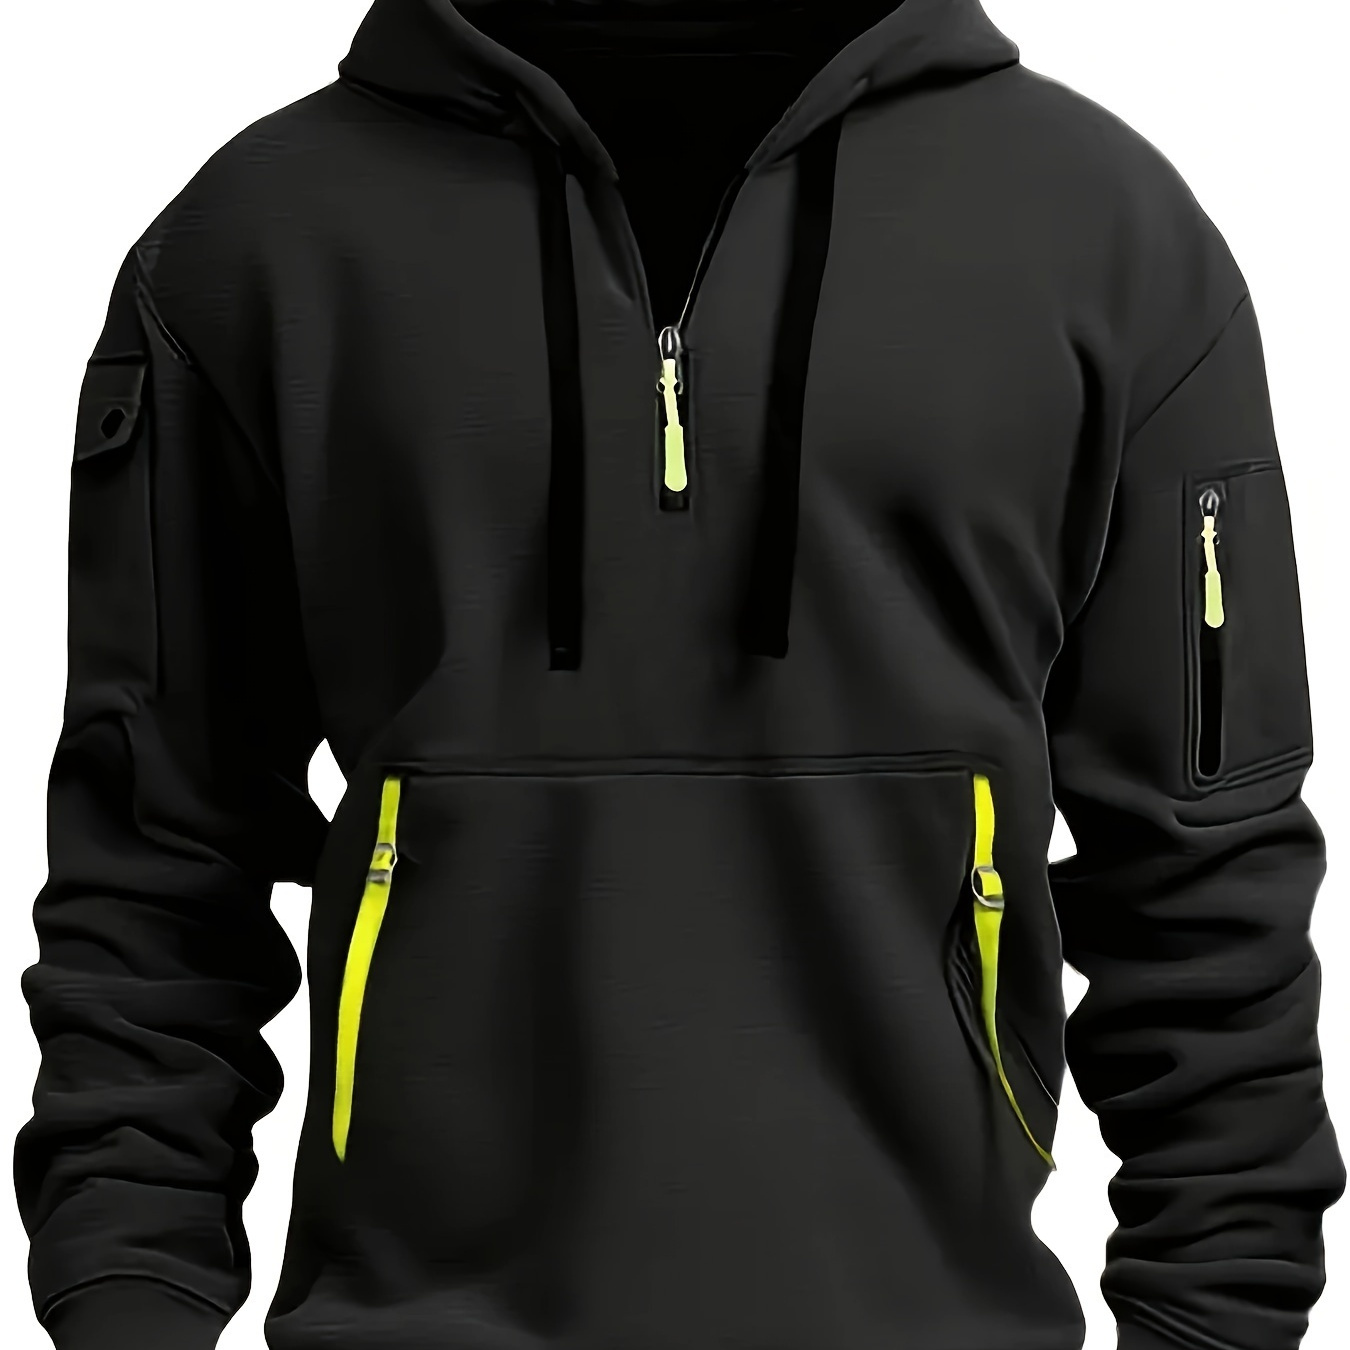 

Men's Fashion Half Zipped Sports Hoodie With Pockets, Casual Athletic Pullover, Comfortable Fit Sweatshirt With Hood